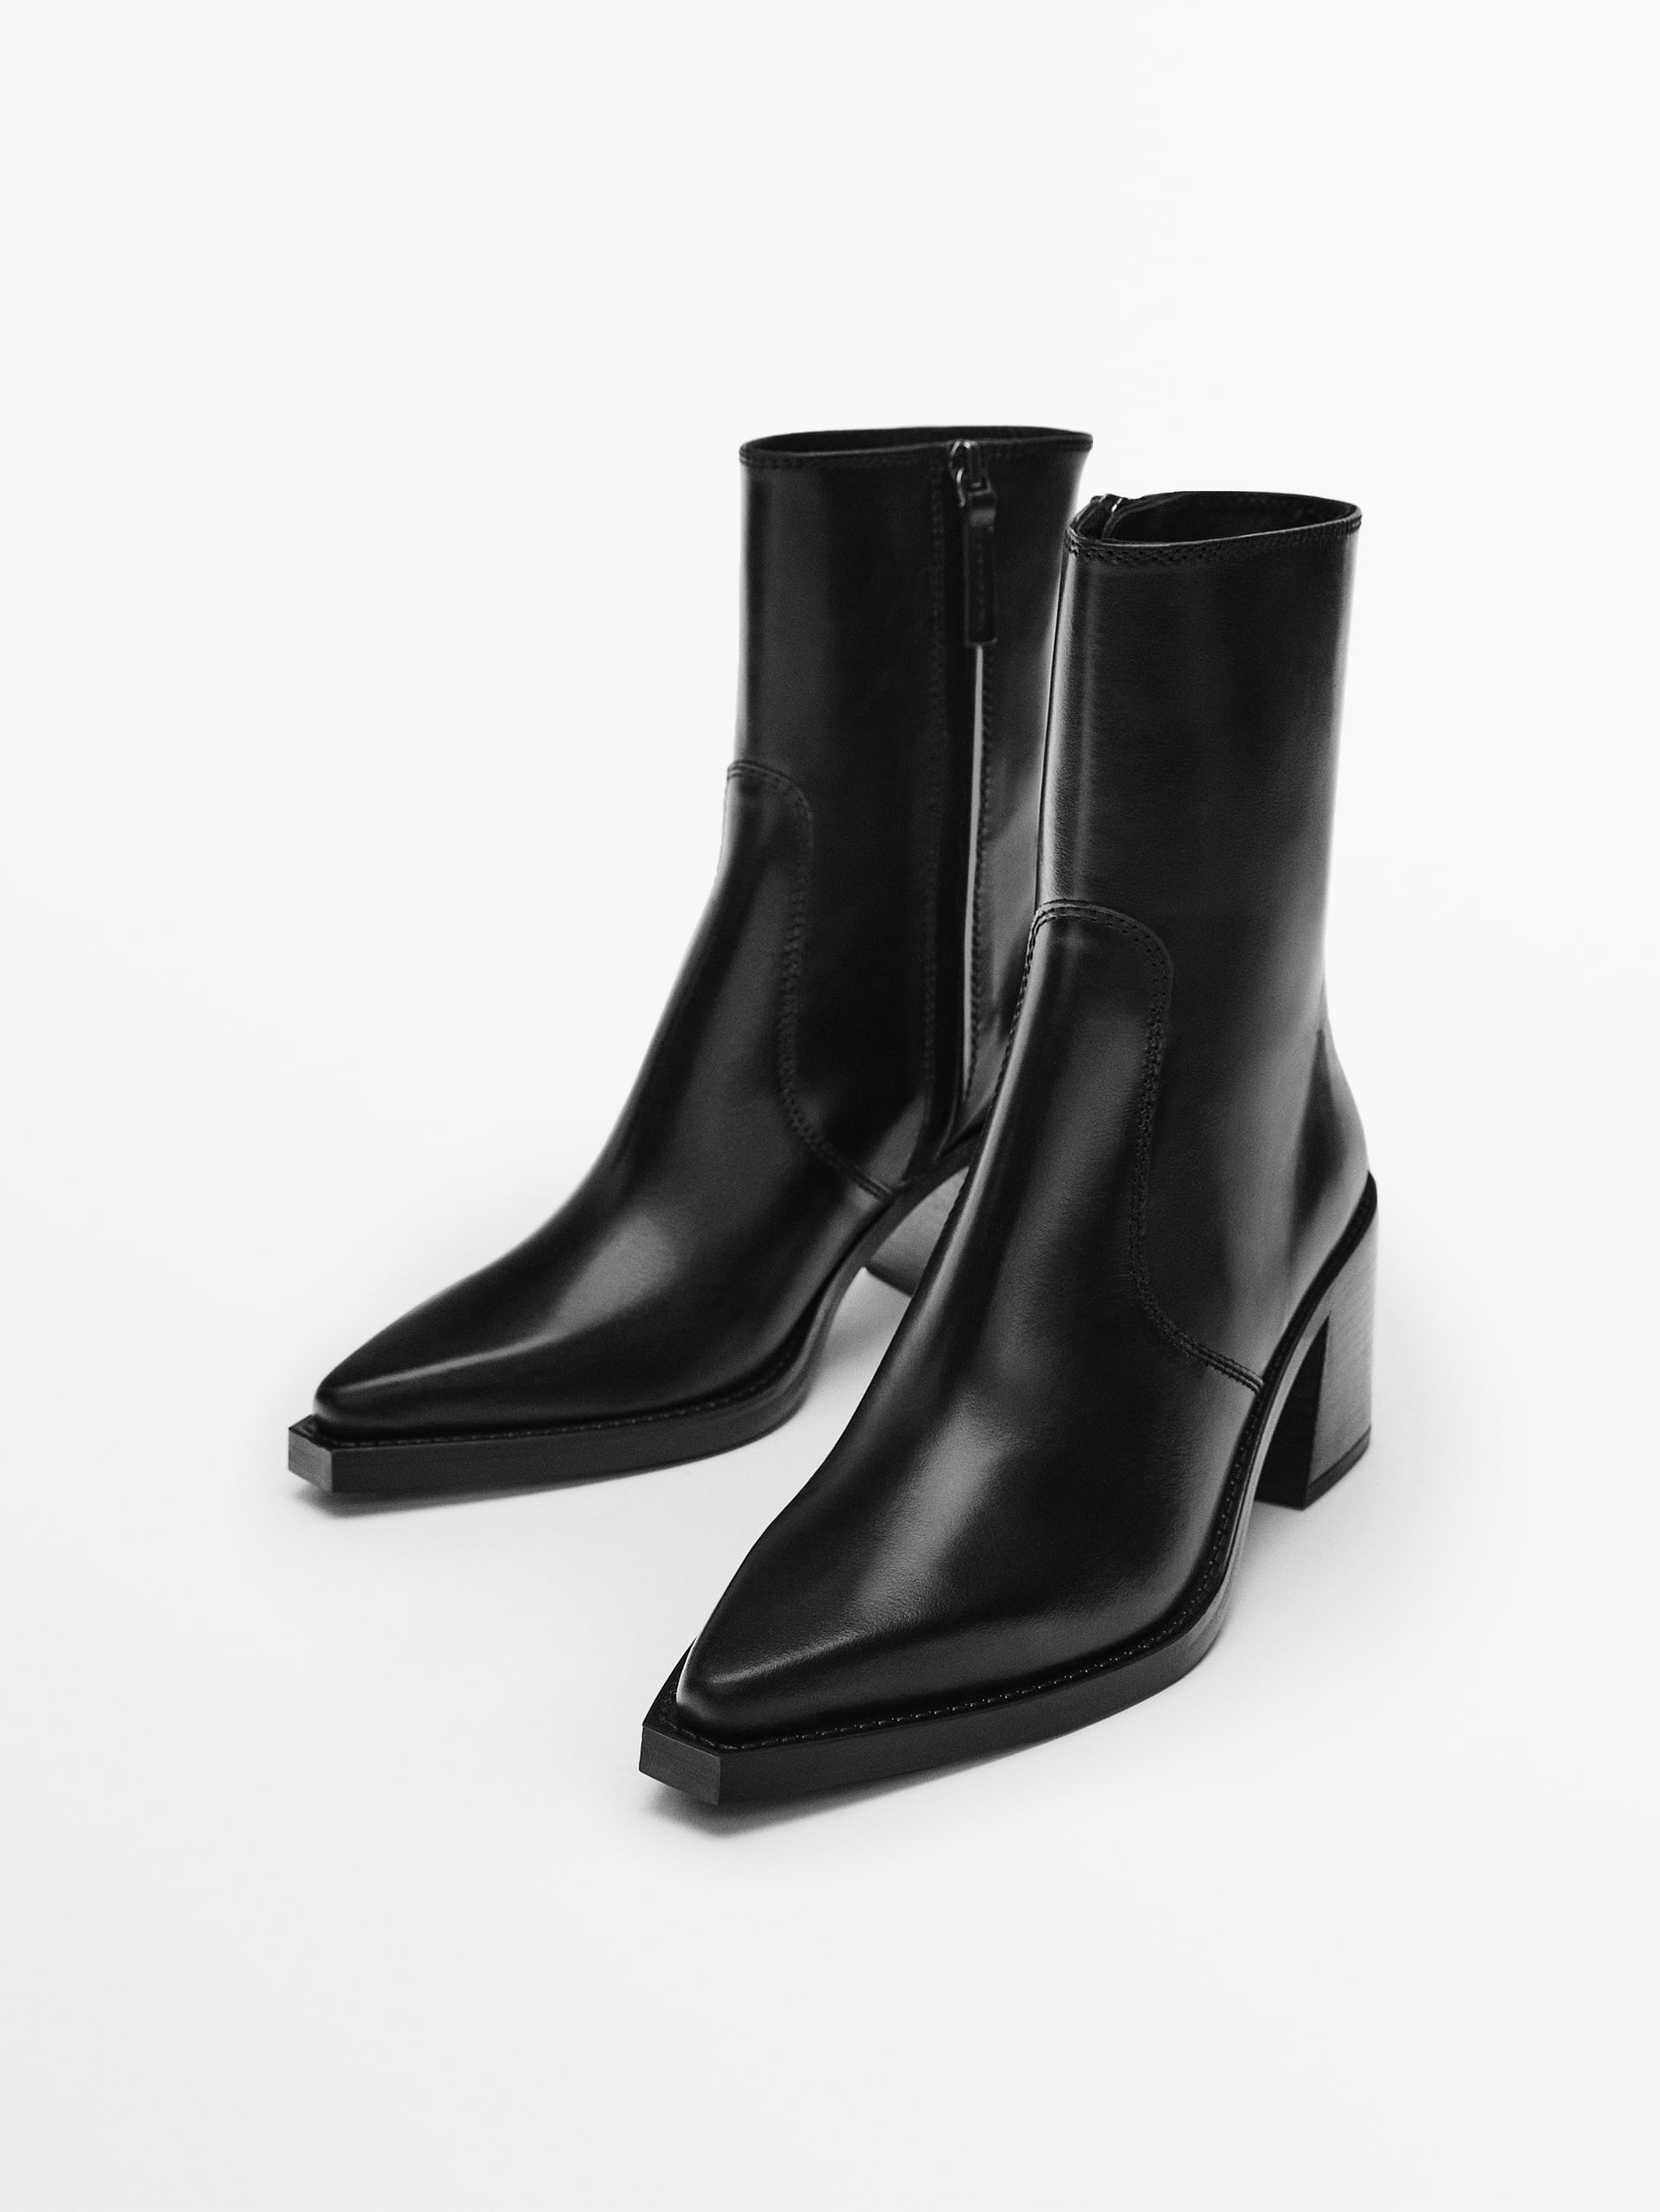 Must-Have Black Heel Boots for Every
Fashionista